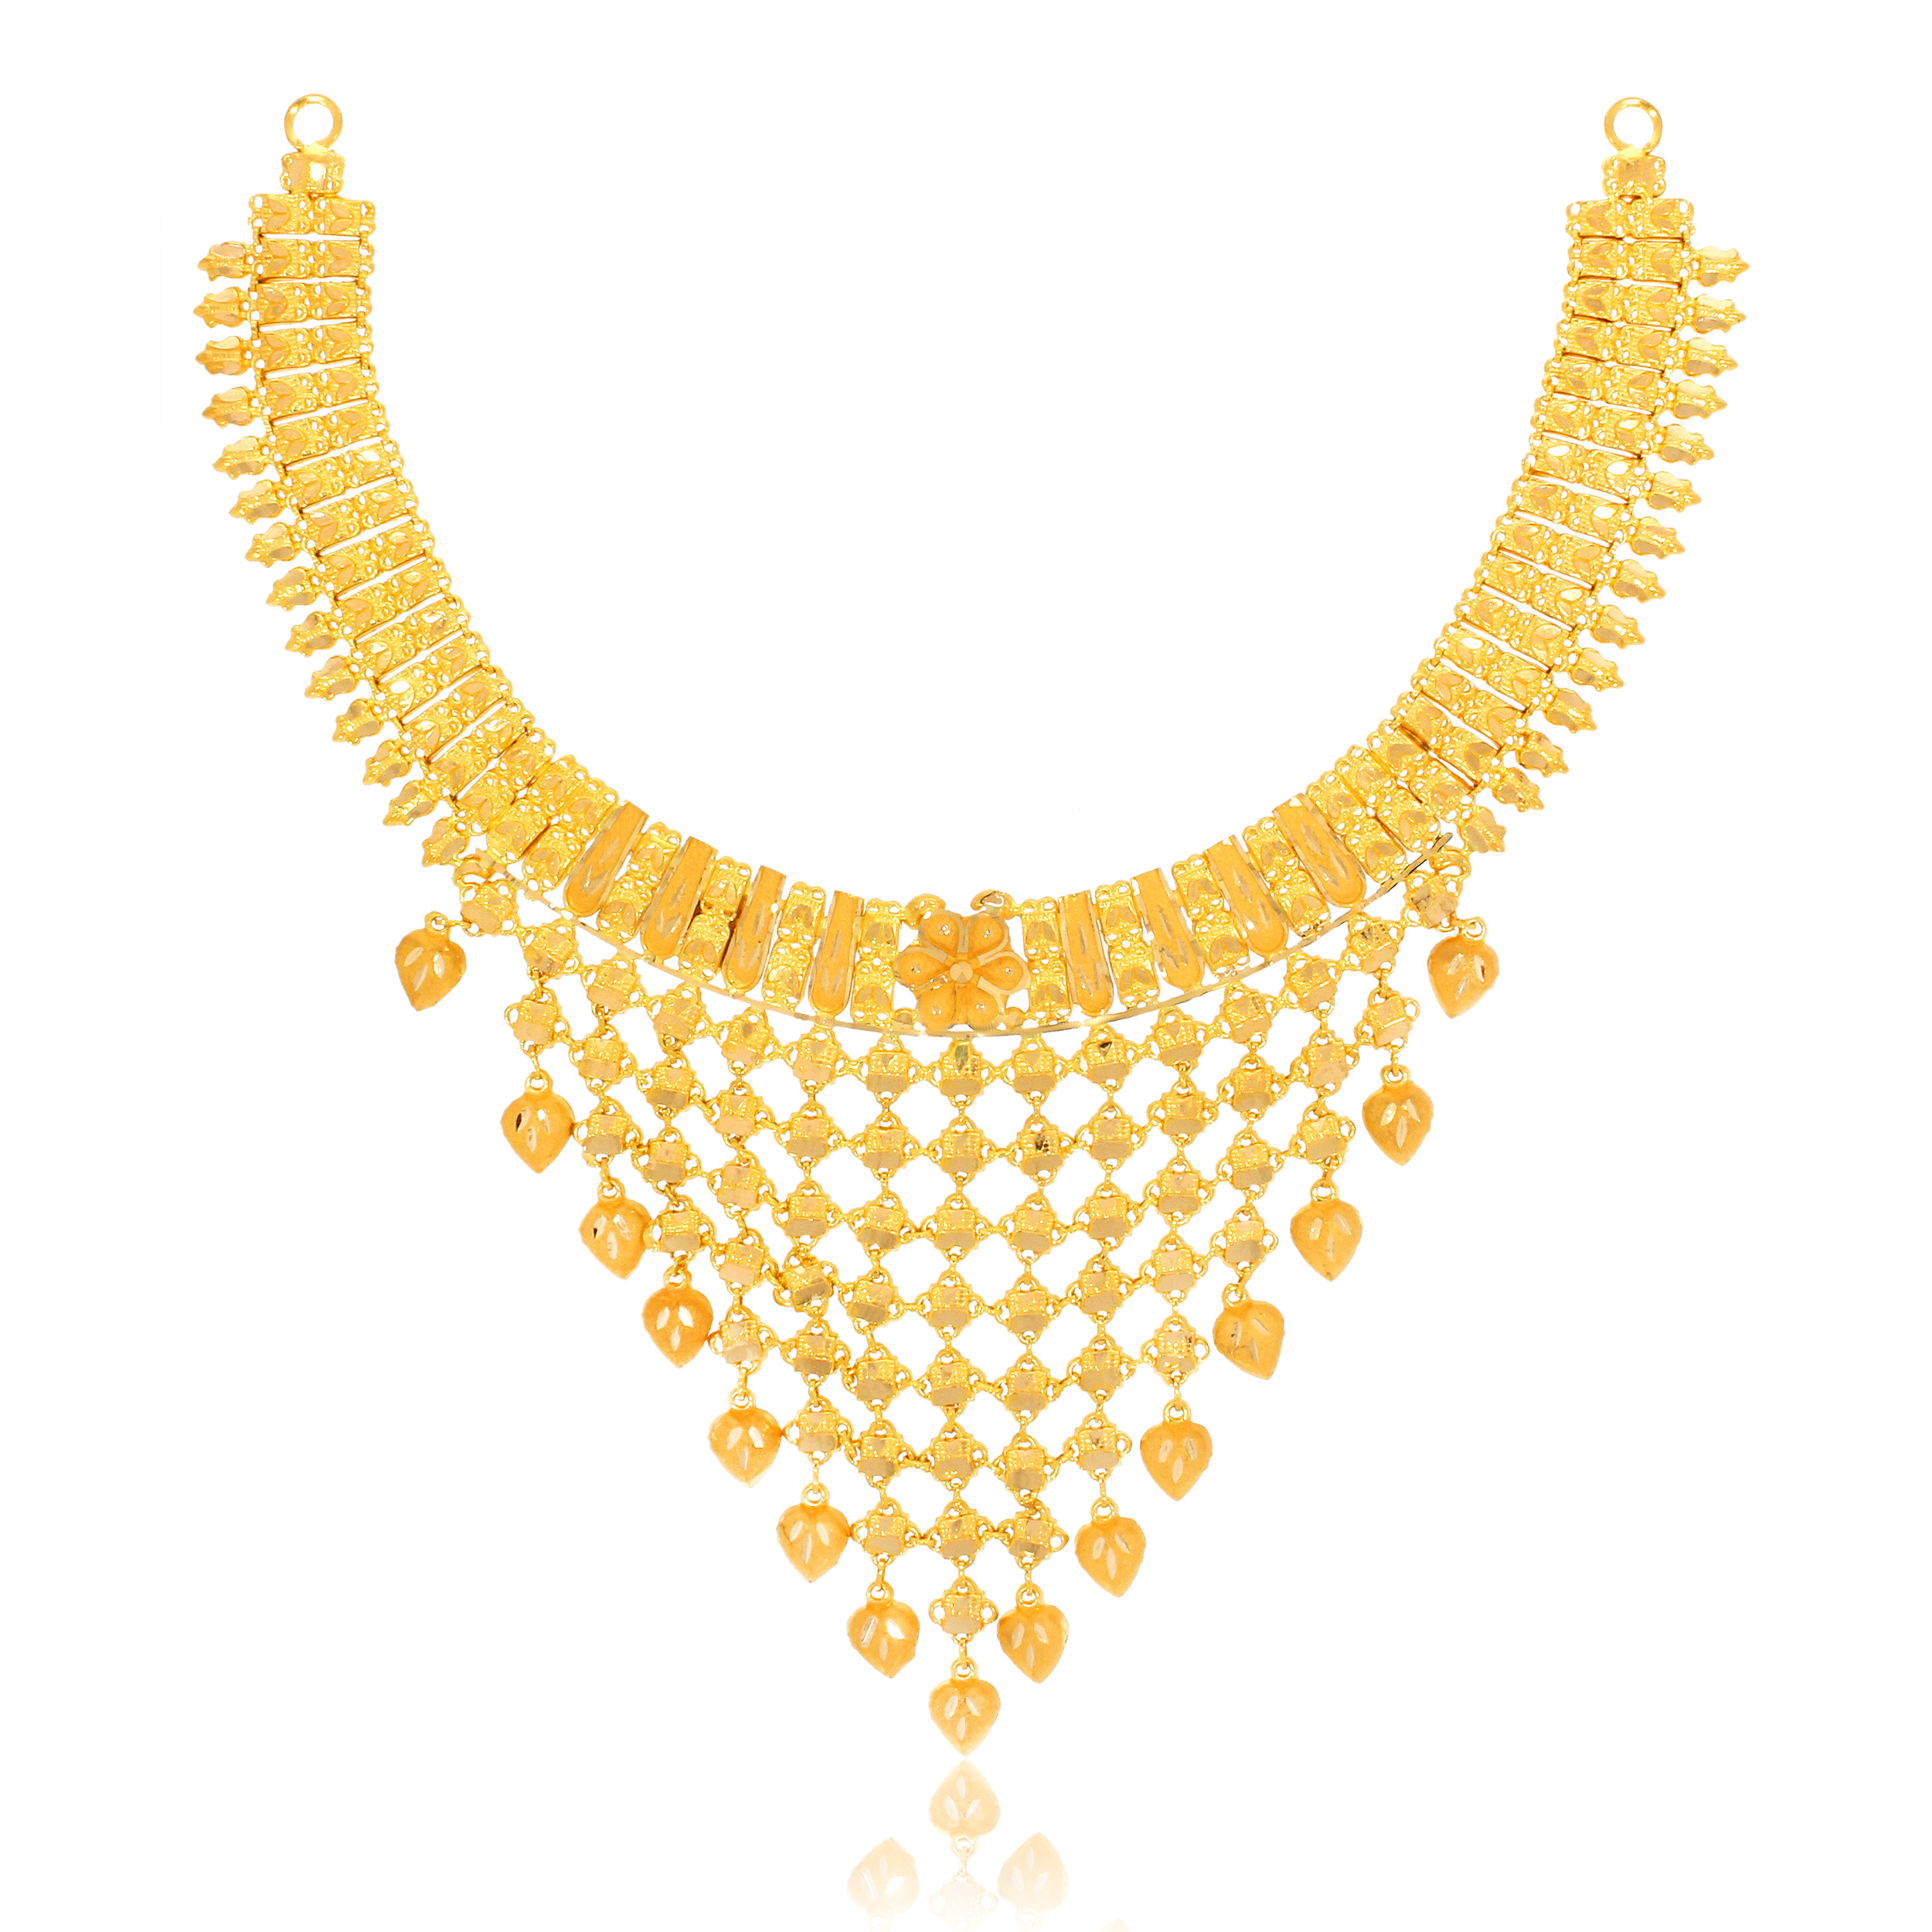 ANU AABI JEWELS 22CT BIS HALLMARK GOLD  NECKLACE FOR WOMAN